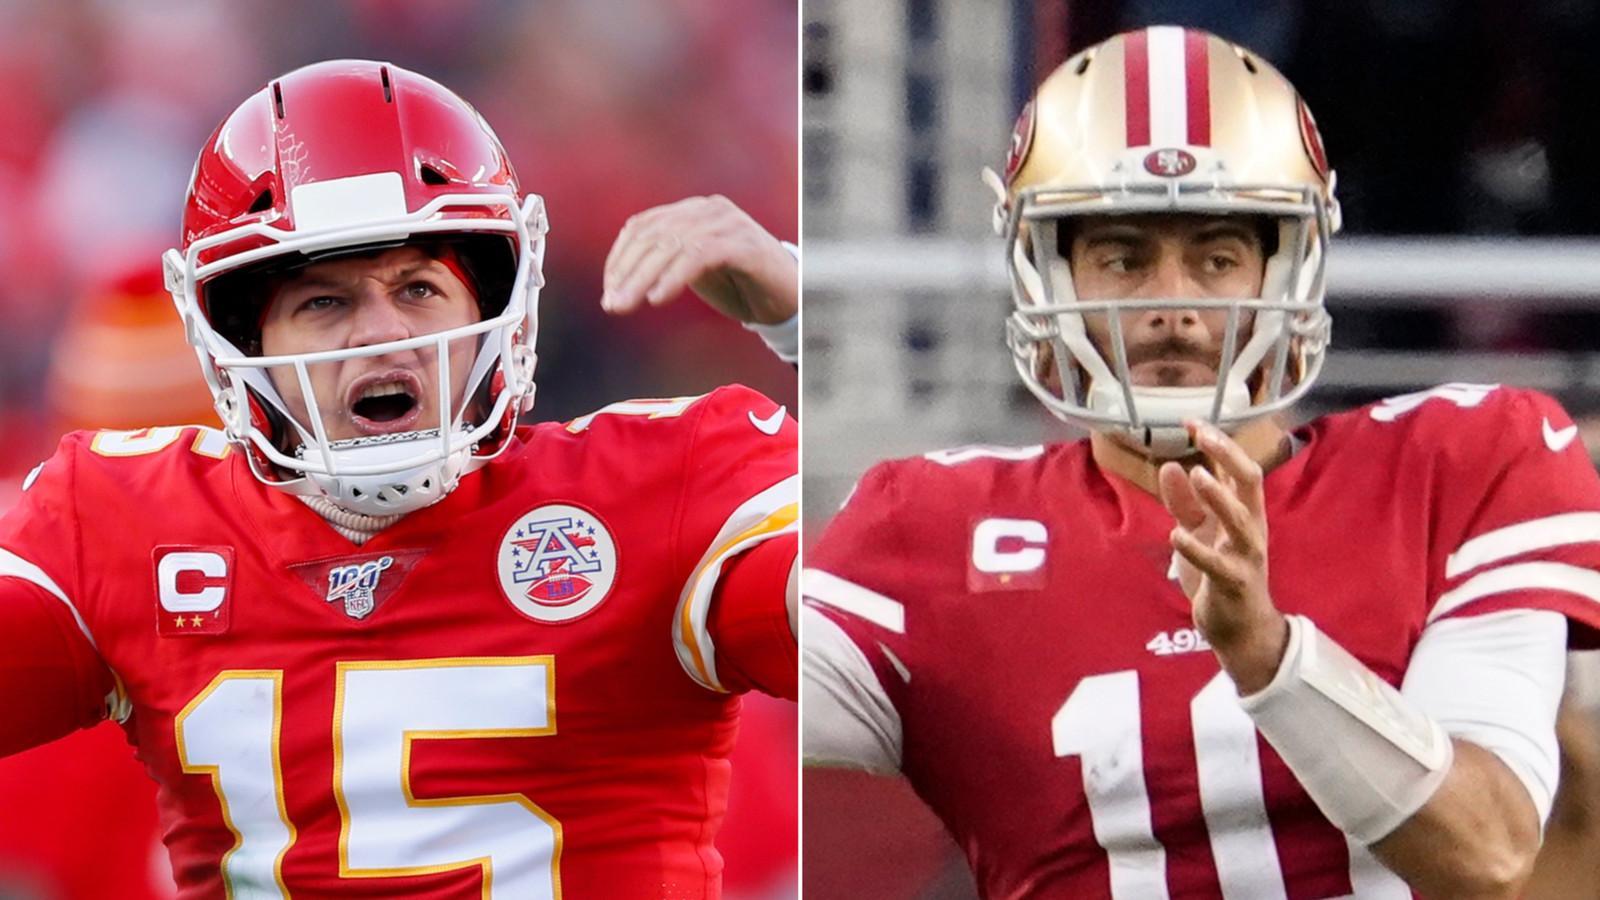 Kansas City Chiefs will play San Francisco 49ers in Super